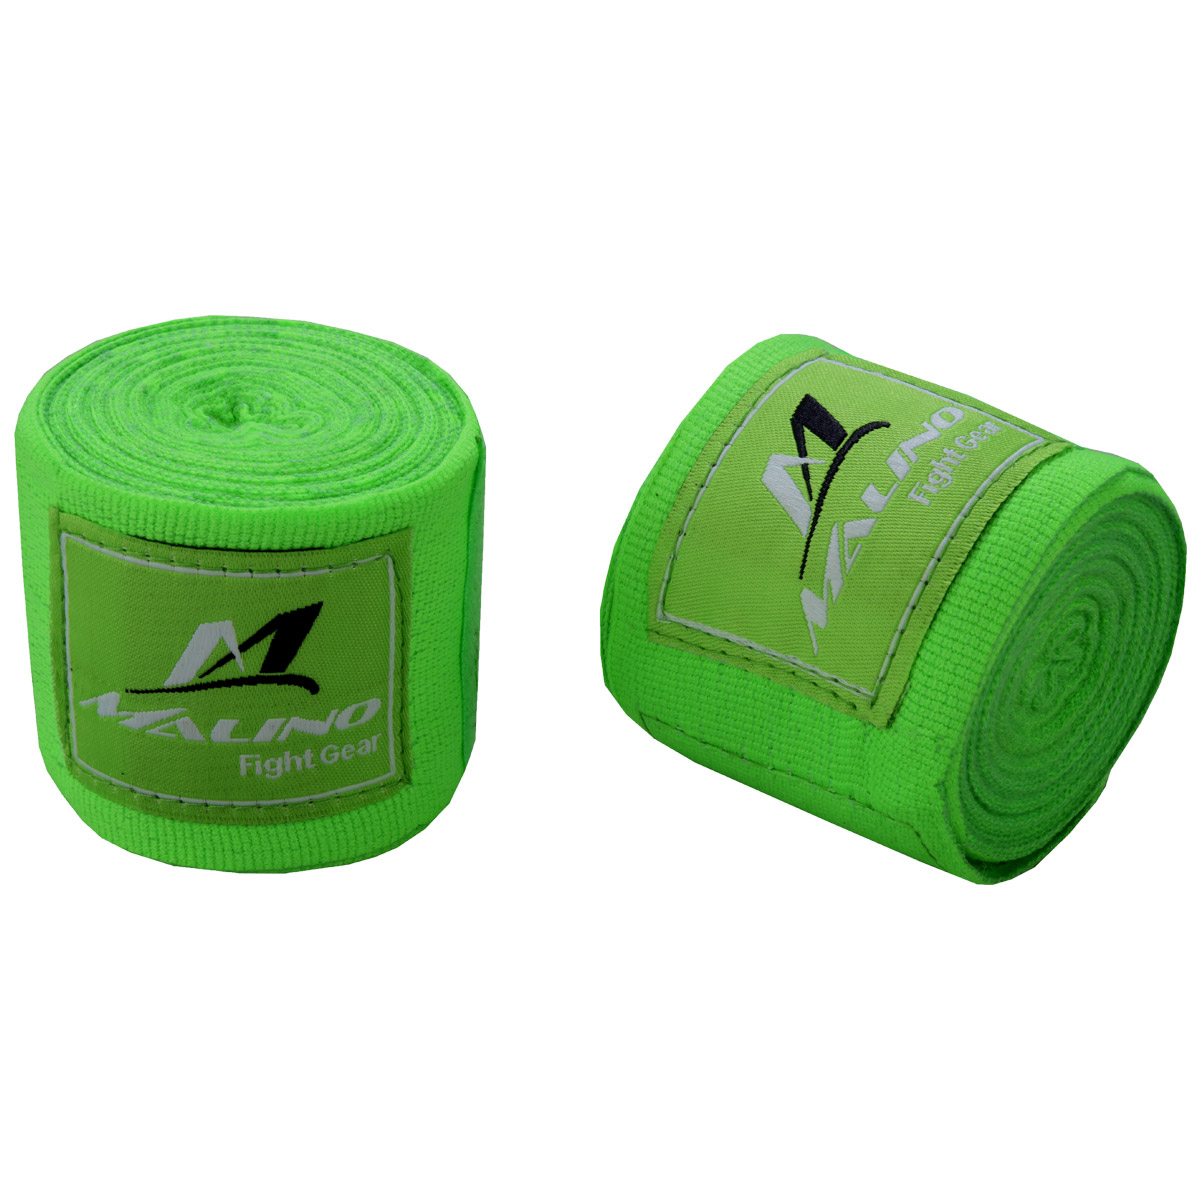 Professional Hand Wraps Boxing Tapes Fluorescent Green